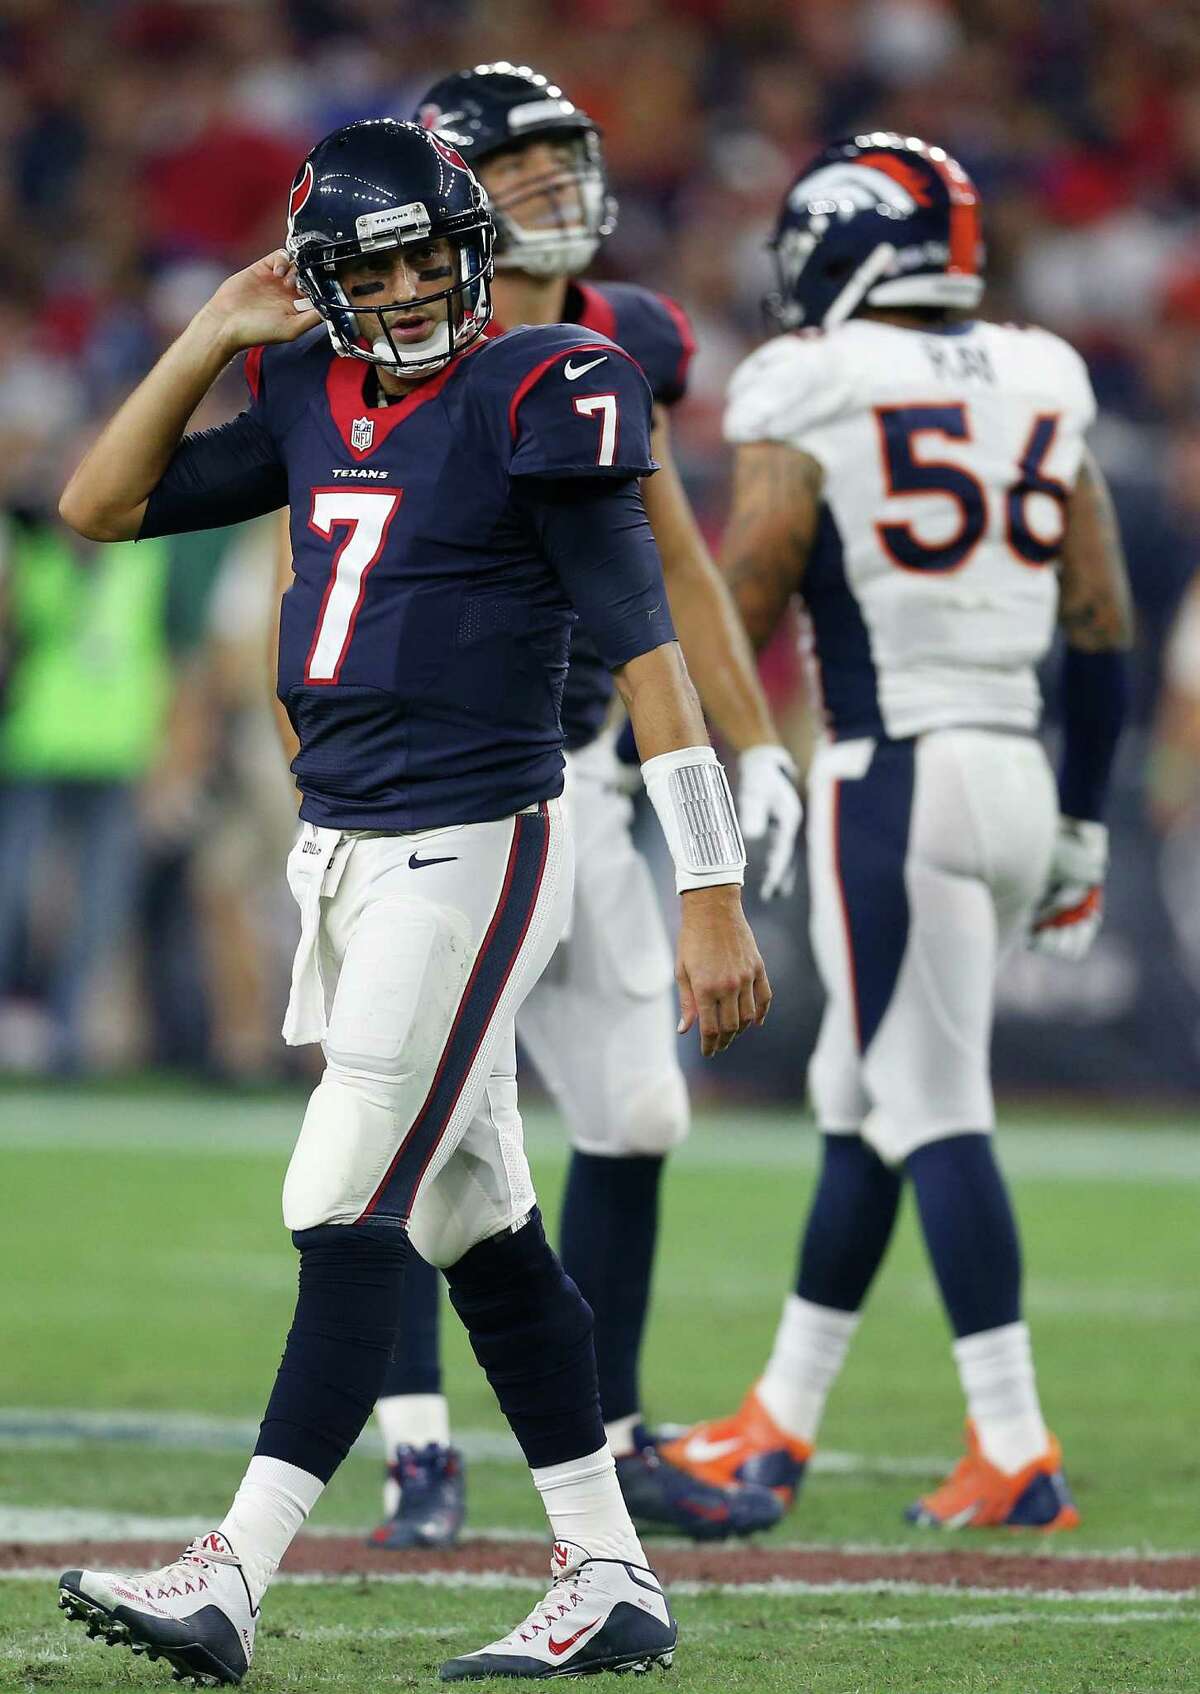 The Texans want to develop the Brian Hoyer who started 6-3 last year for the Browns and not the one who ended 1-3.